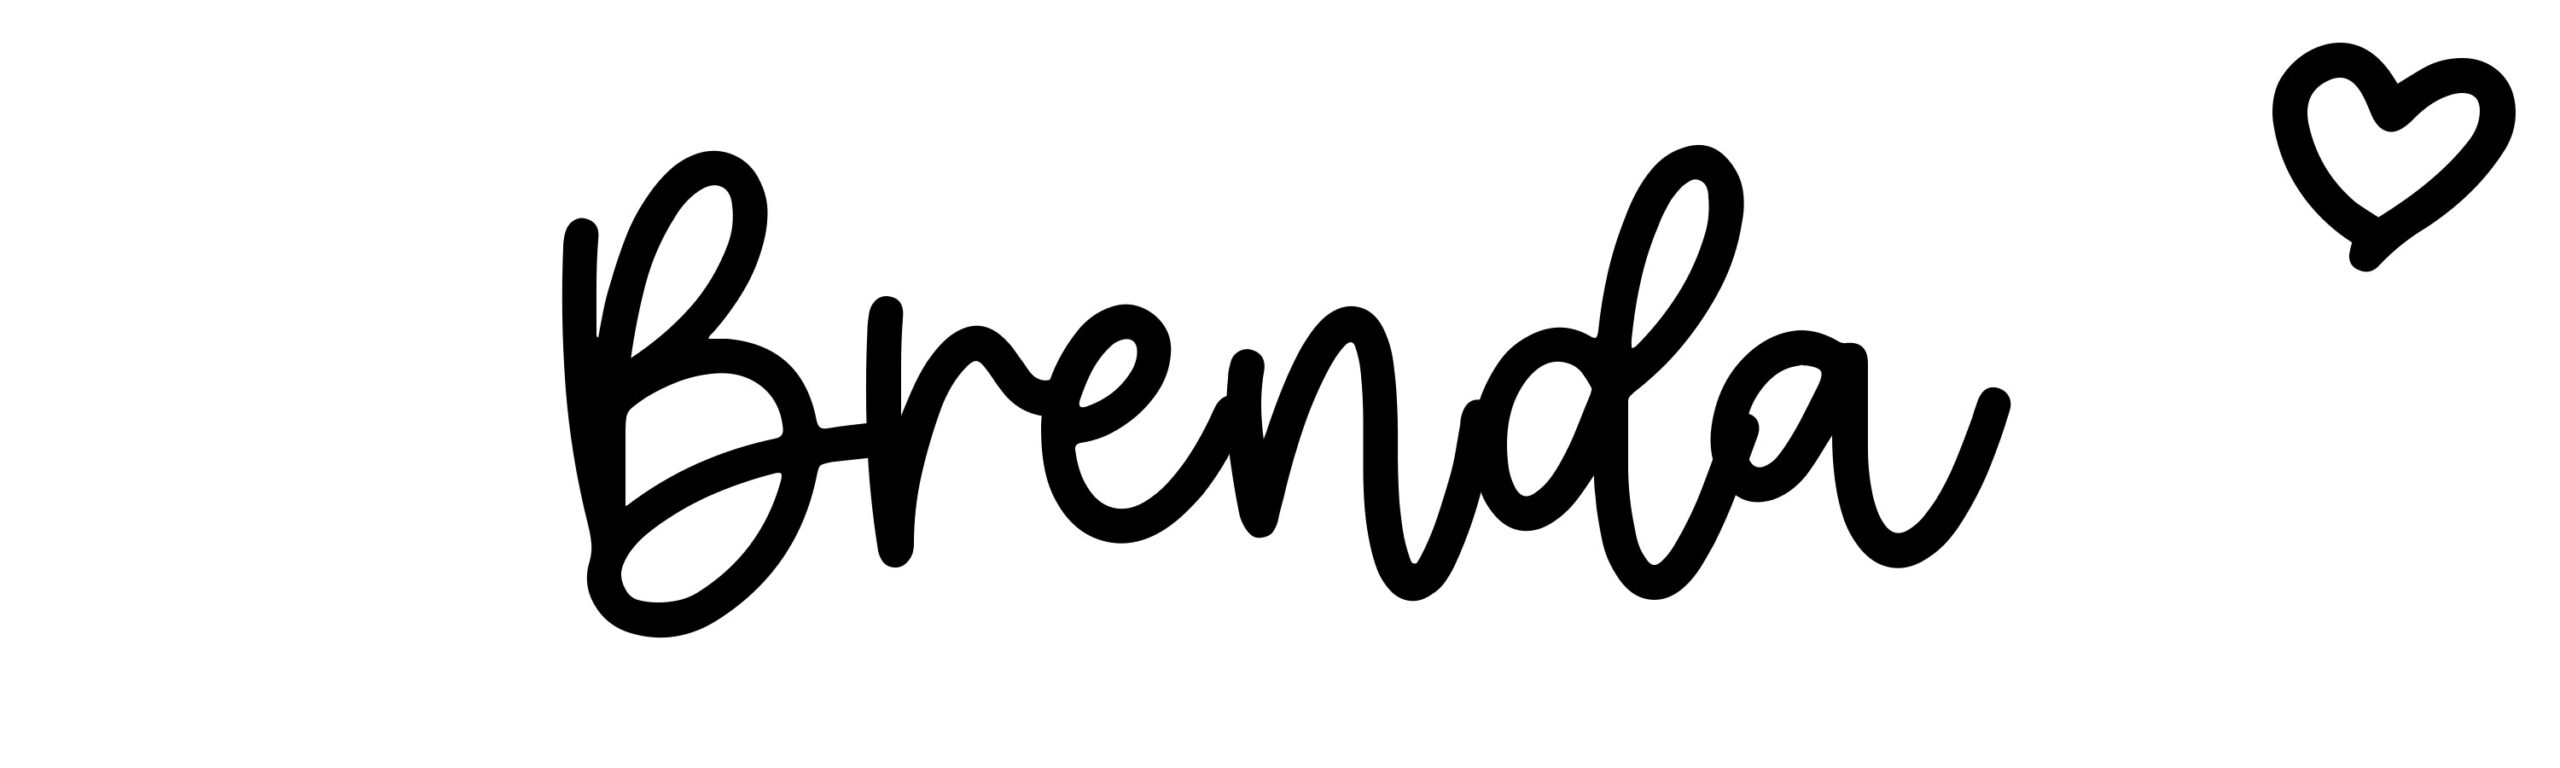 Brenda - Name meaning, origin, variations and more